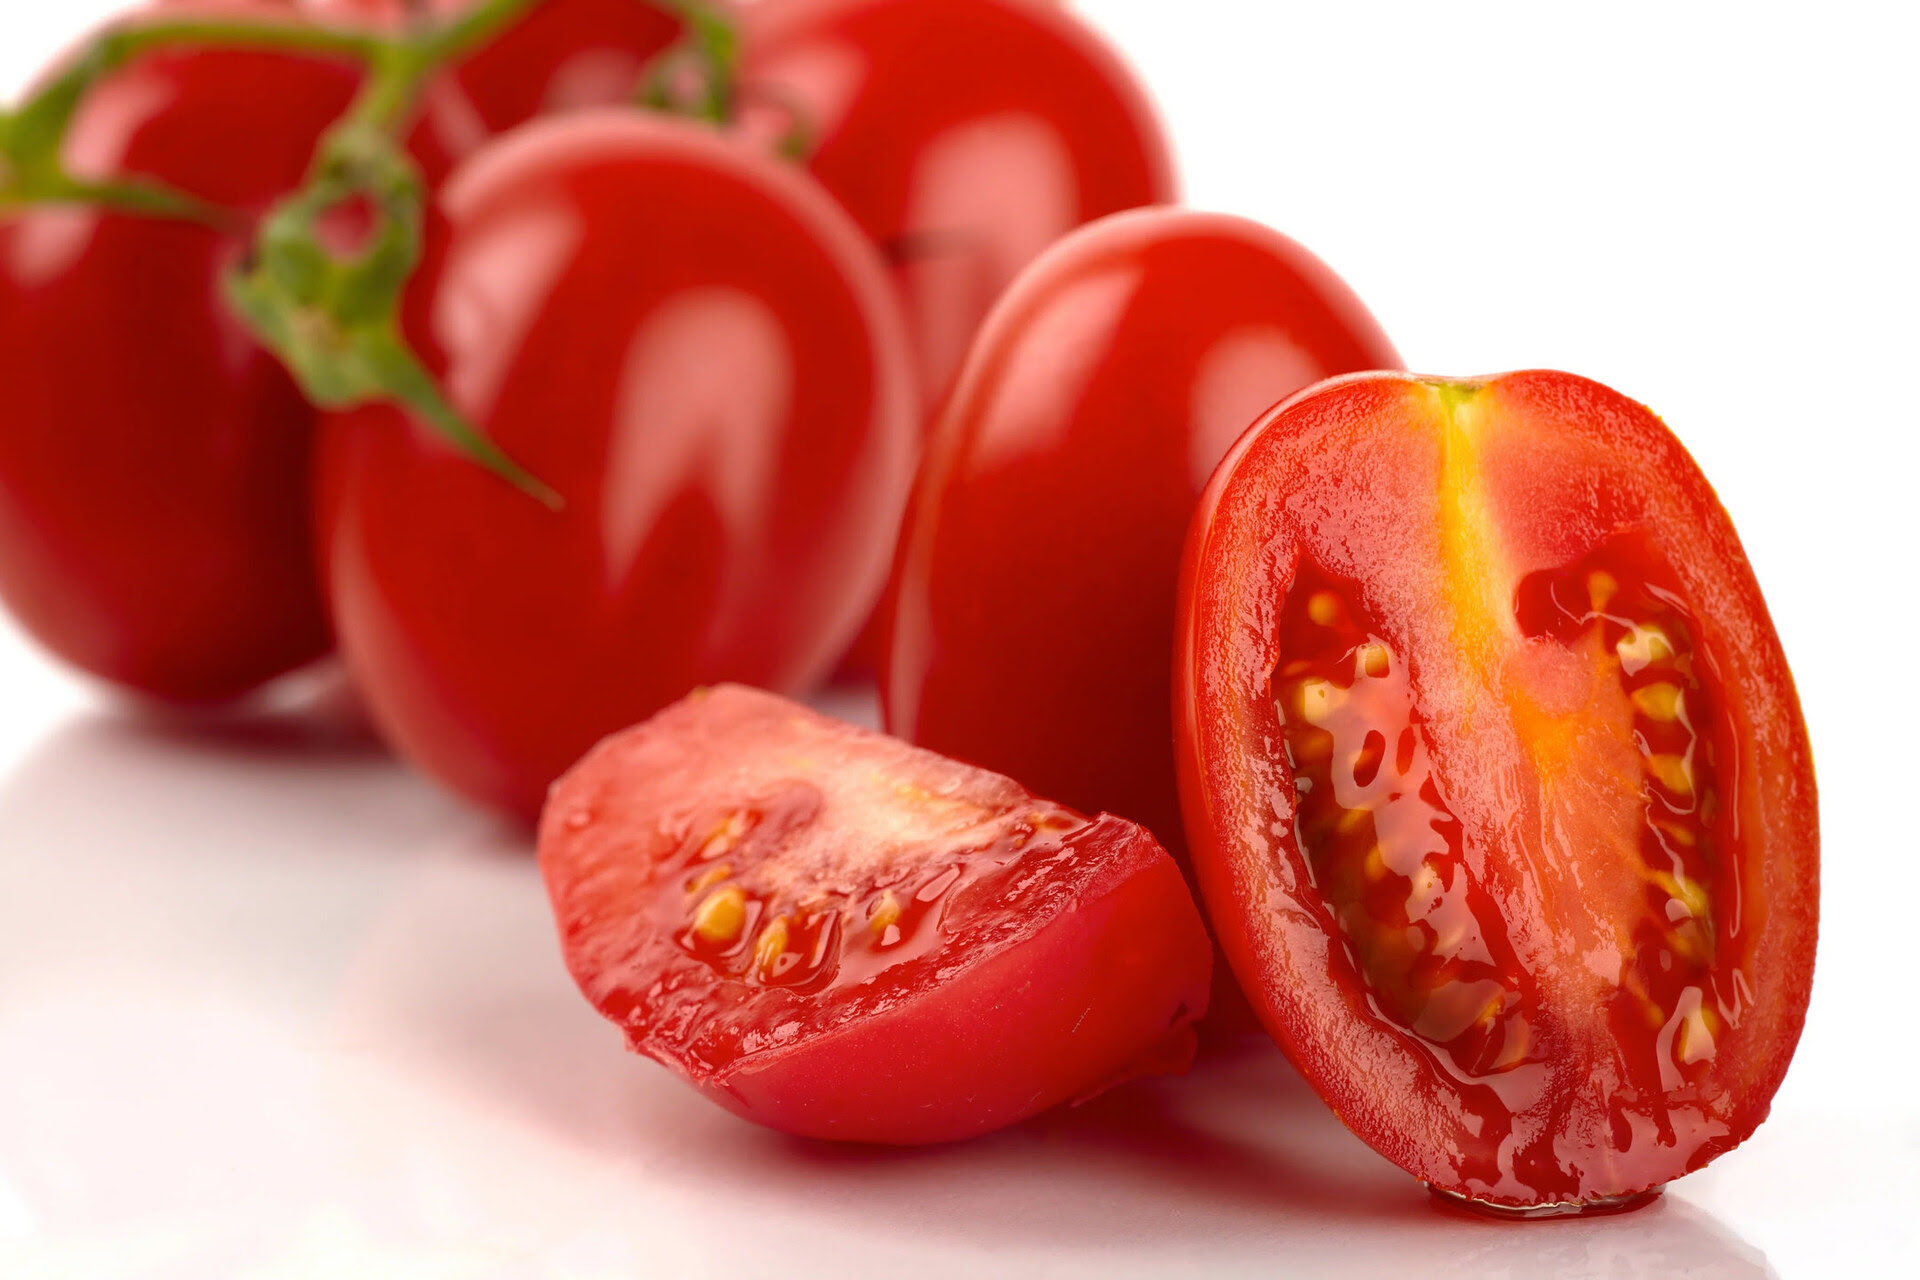 How To Seed A Roma Tomato